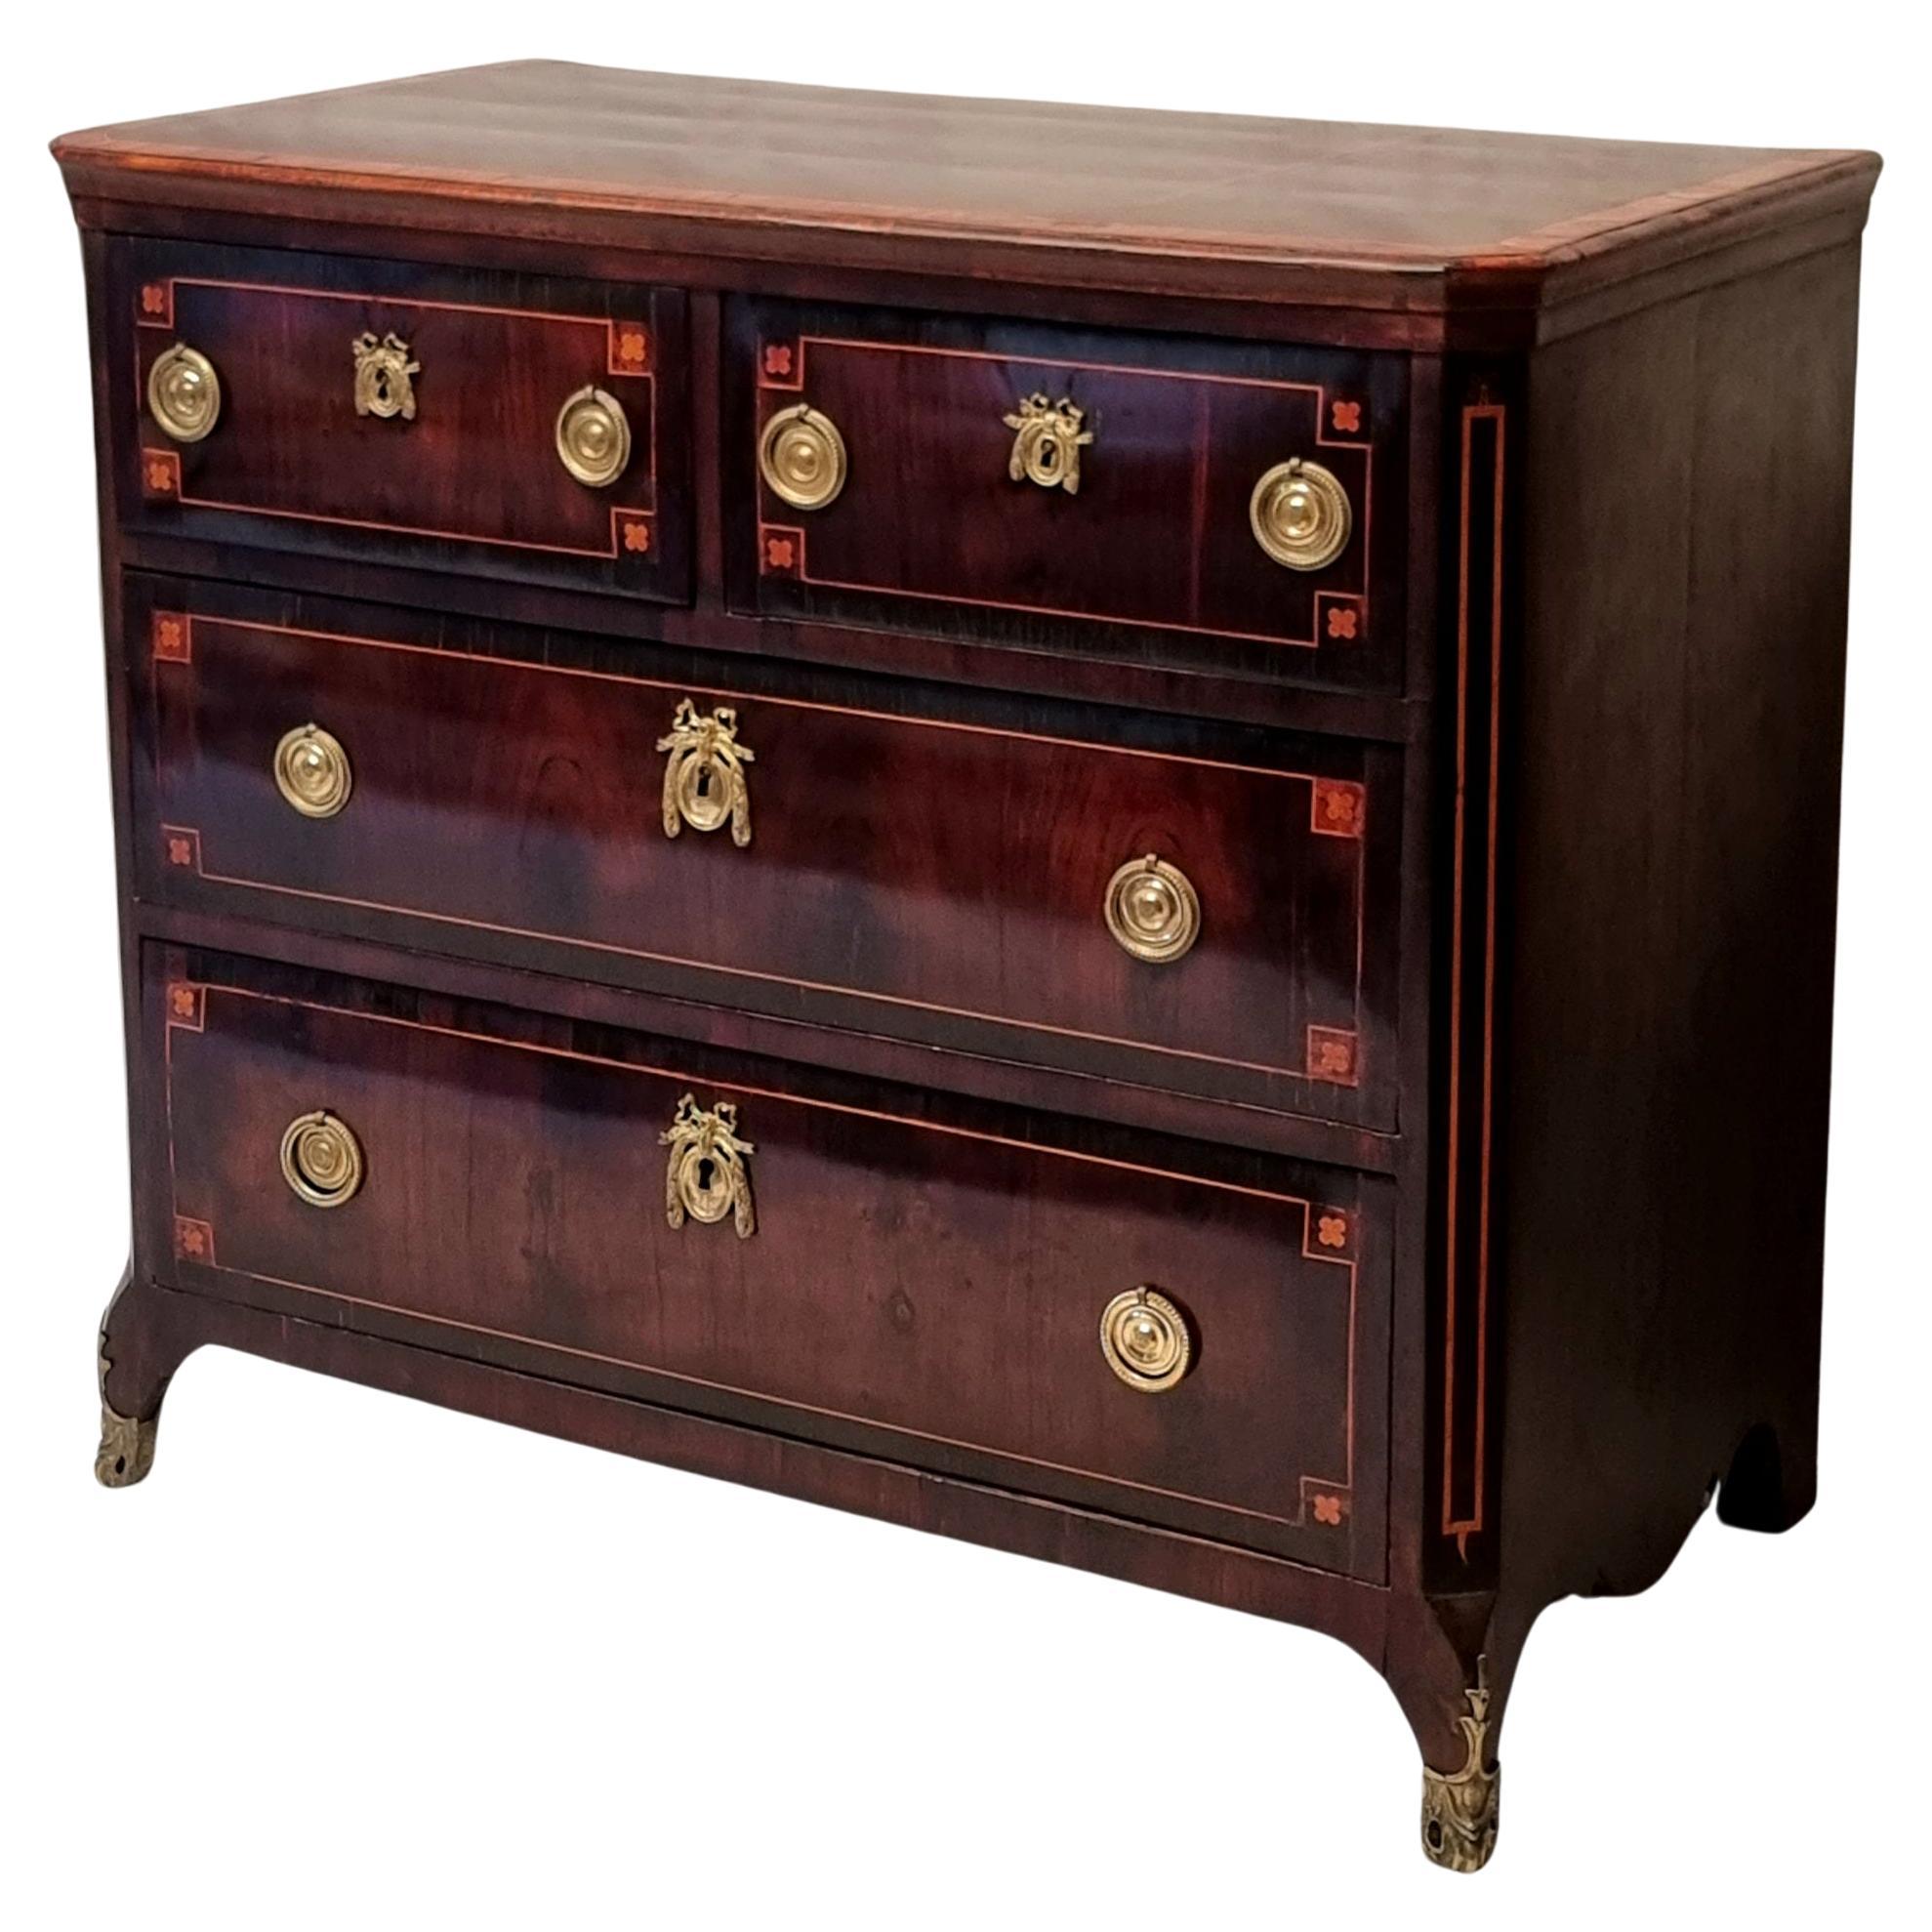 Louis XV Period Chest Of Drawers - Amaranth & Violet Wood - 18th For Sale